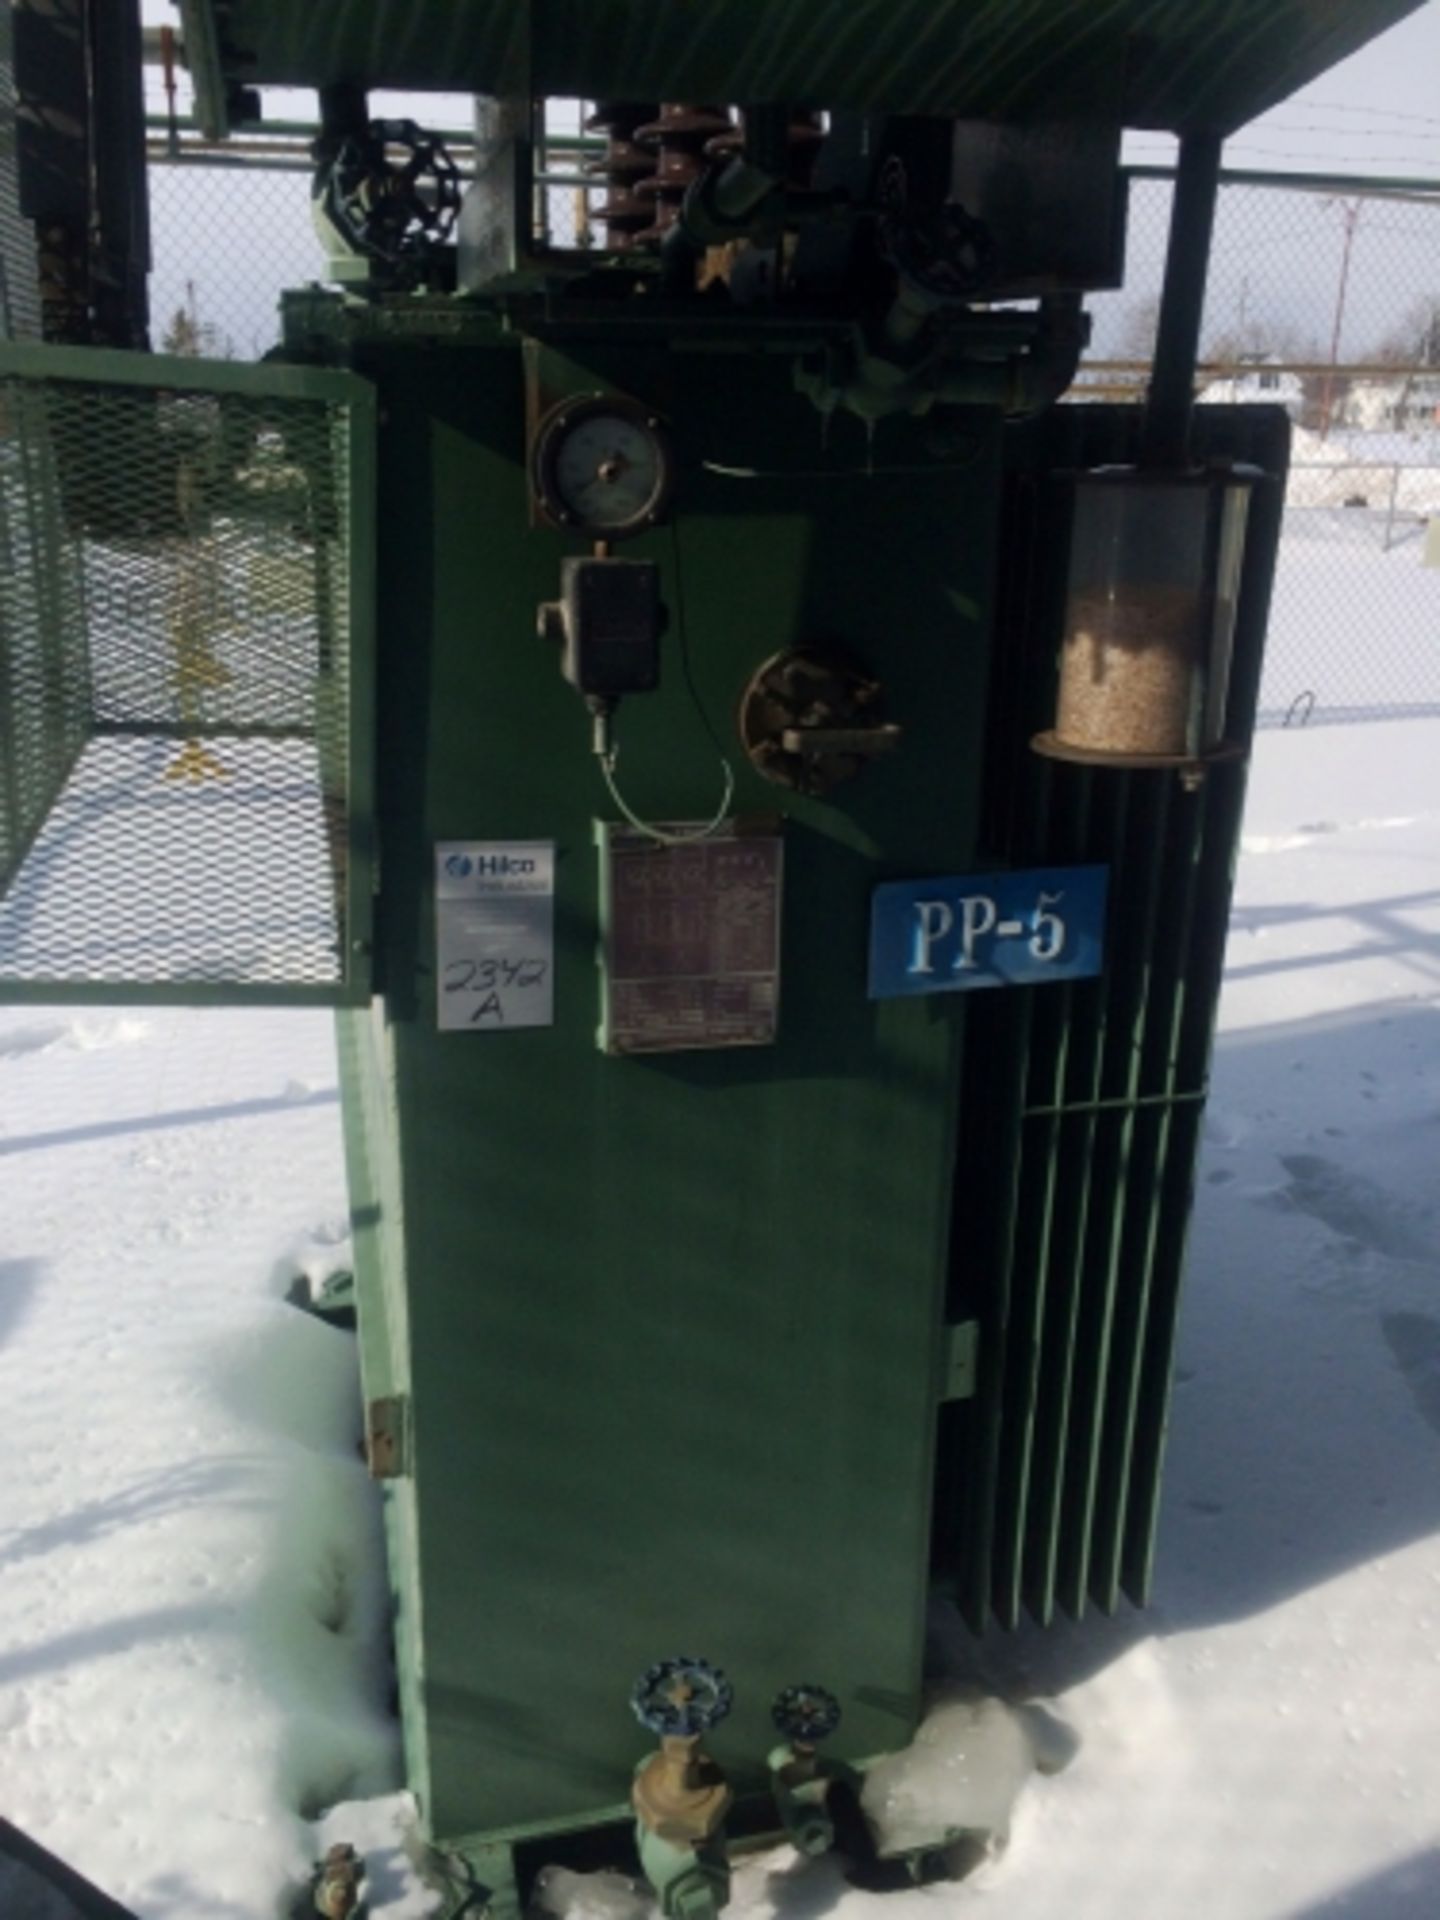 Cansfield Electrical Works 750 KVA Type ONS Transformer; Serial Number: 29234; H.V. 13800 ; L.V.